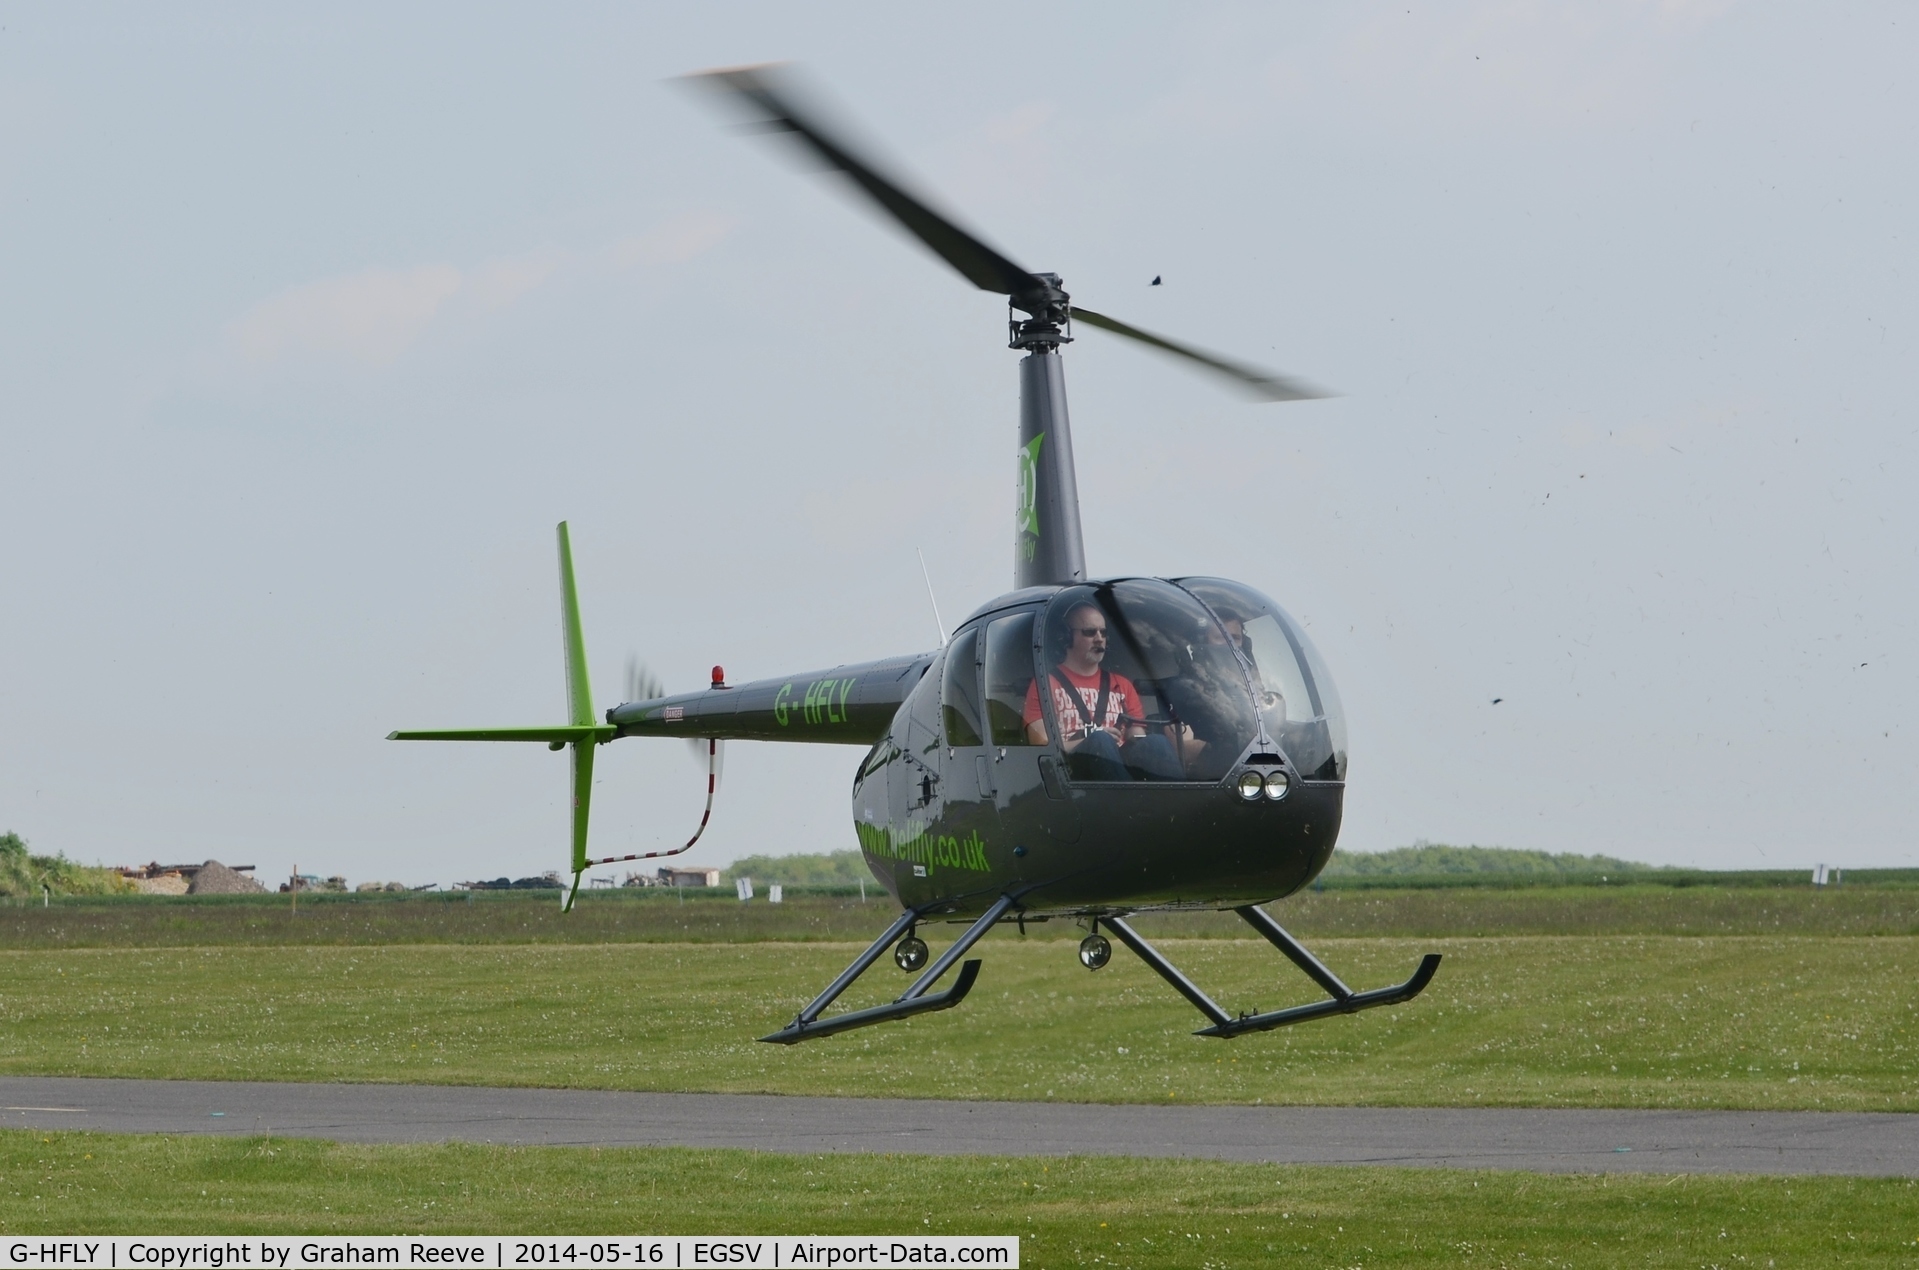 G-HFLY, 2007 Robinson R44  Raven II C/N 11876, About to land.